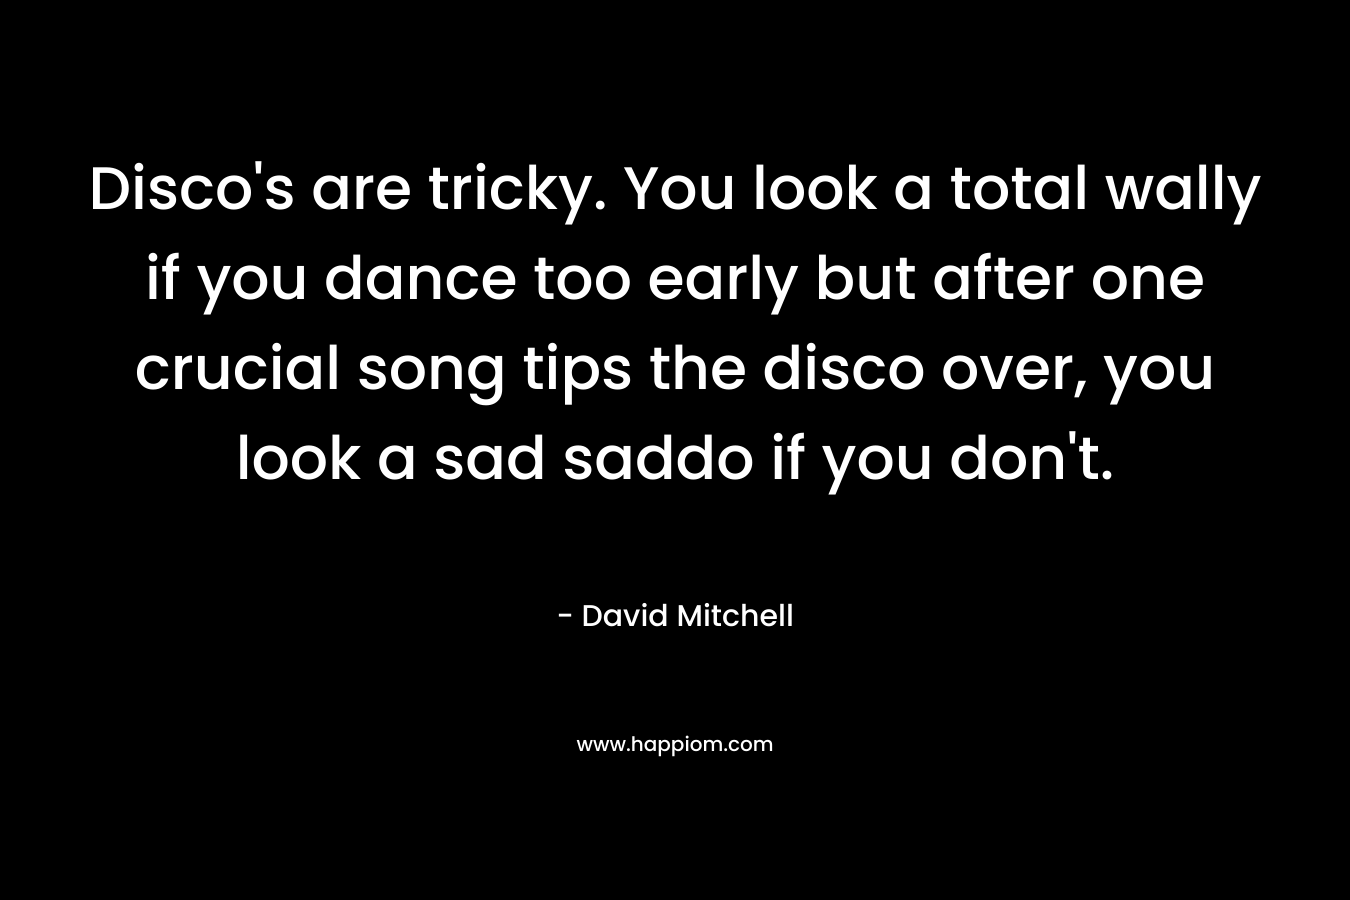 Disco’s are tricky. You look a total wally if you dance too early but after one crucial song tips the disco over, you look a sad saddo if you don’t. – David Mitchell